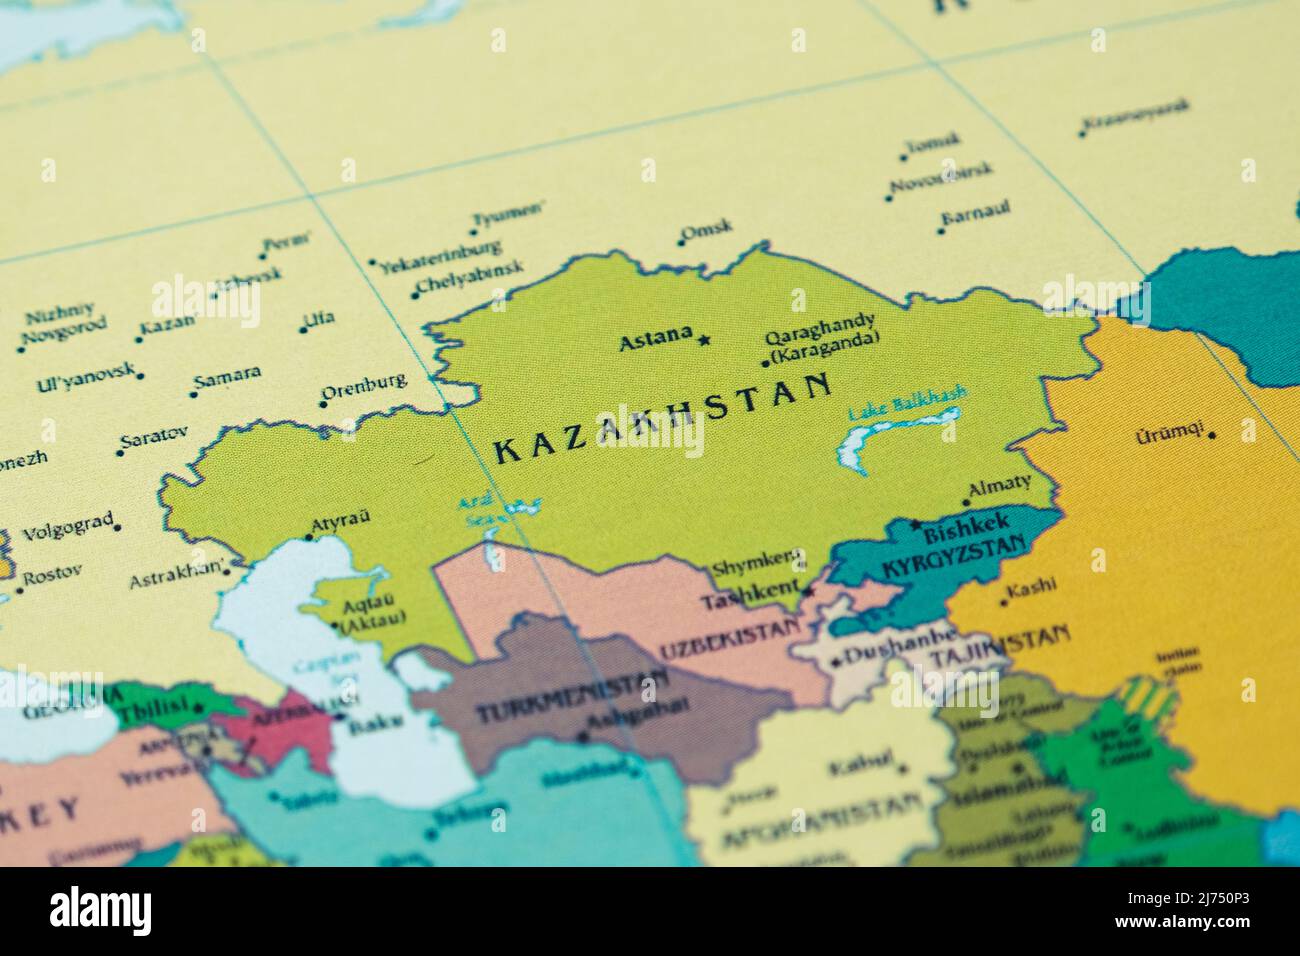 Kazakhistan country and location on map, macro shot and close-up of Kazakhistan on map, travel idea, vacation concept, Kazakh culture Stock Photo